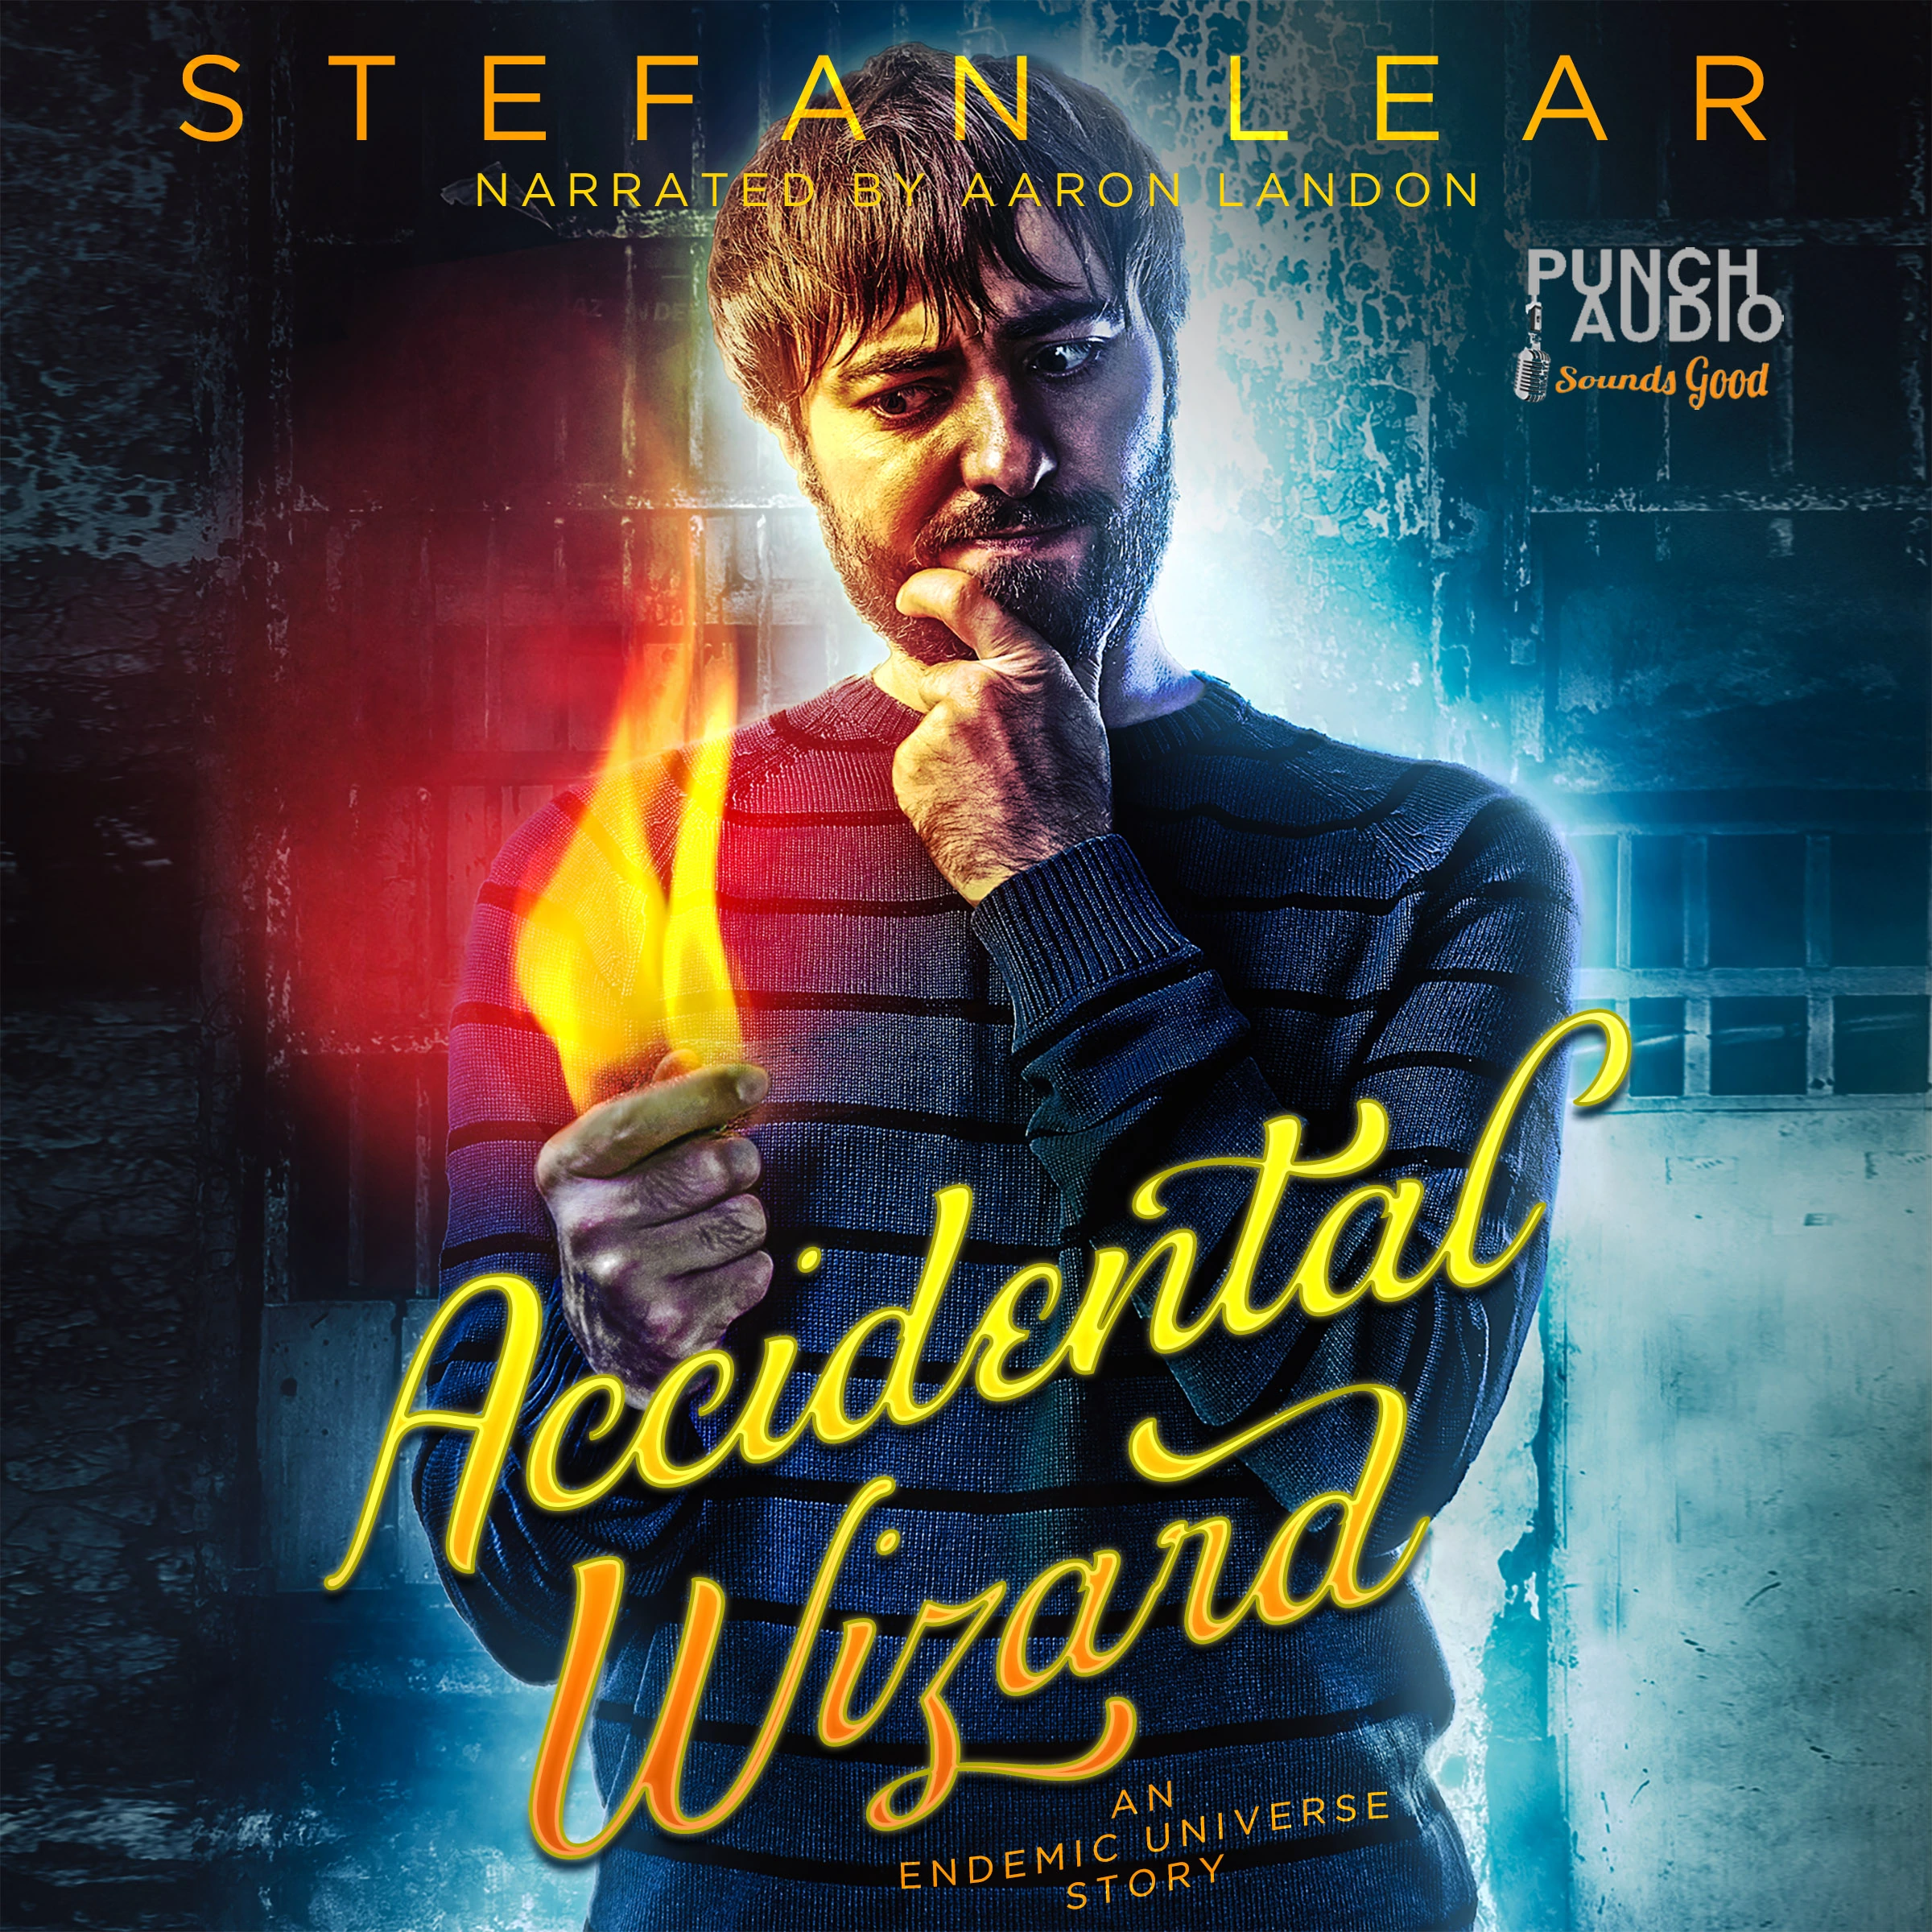 Accidental Wizard (The Accidental Wizard Book 0) by Stefan Lear Audiobook